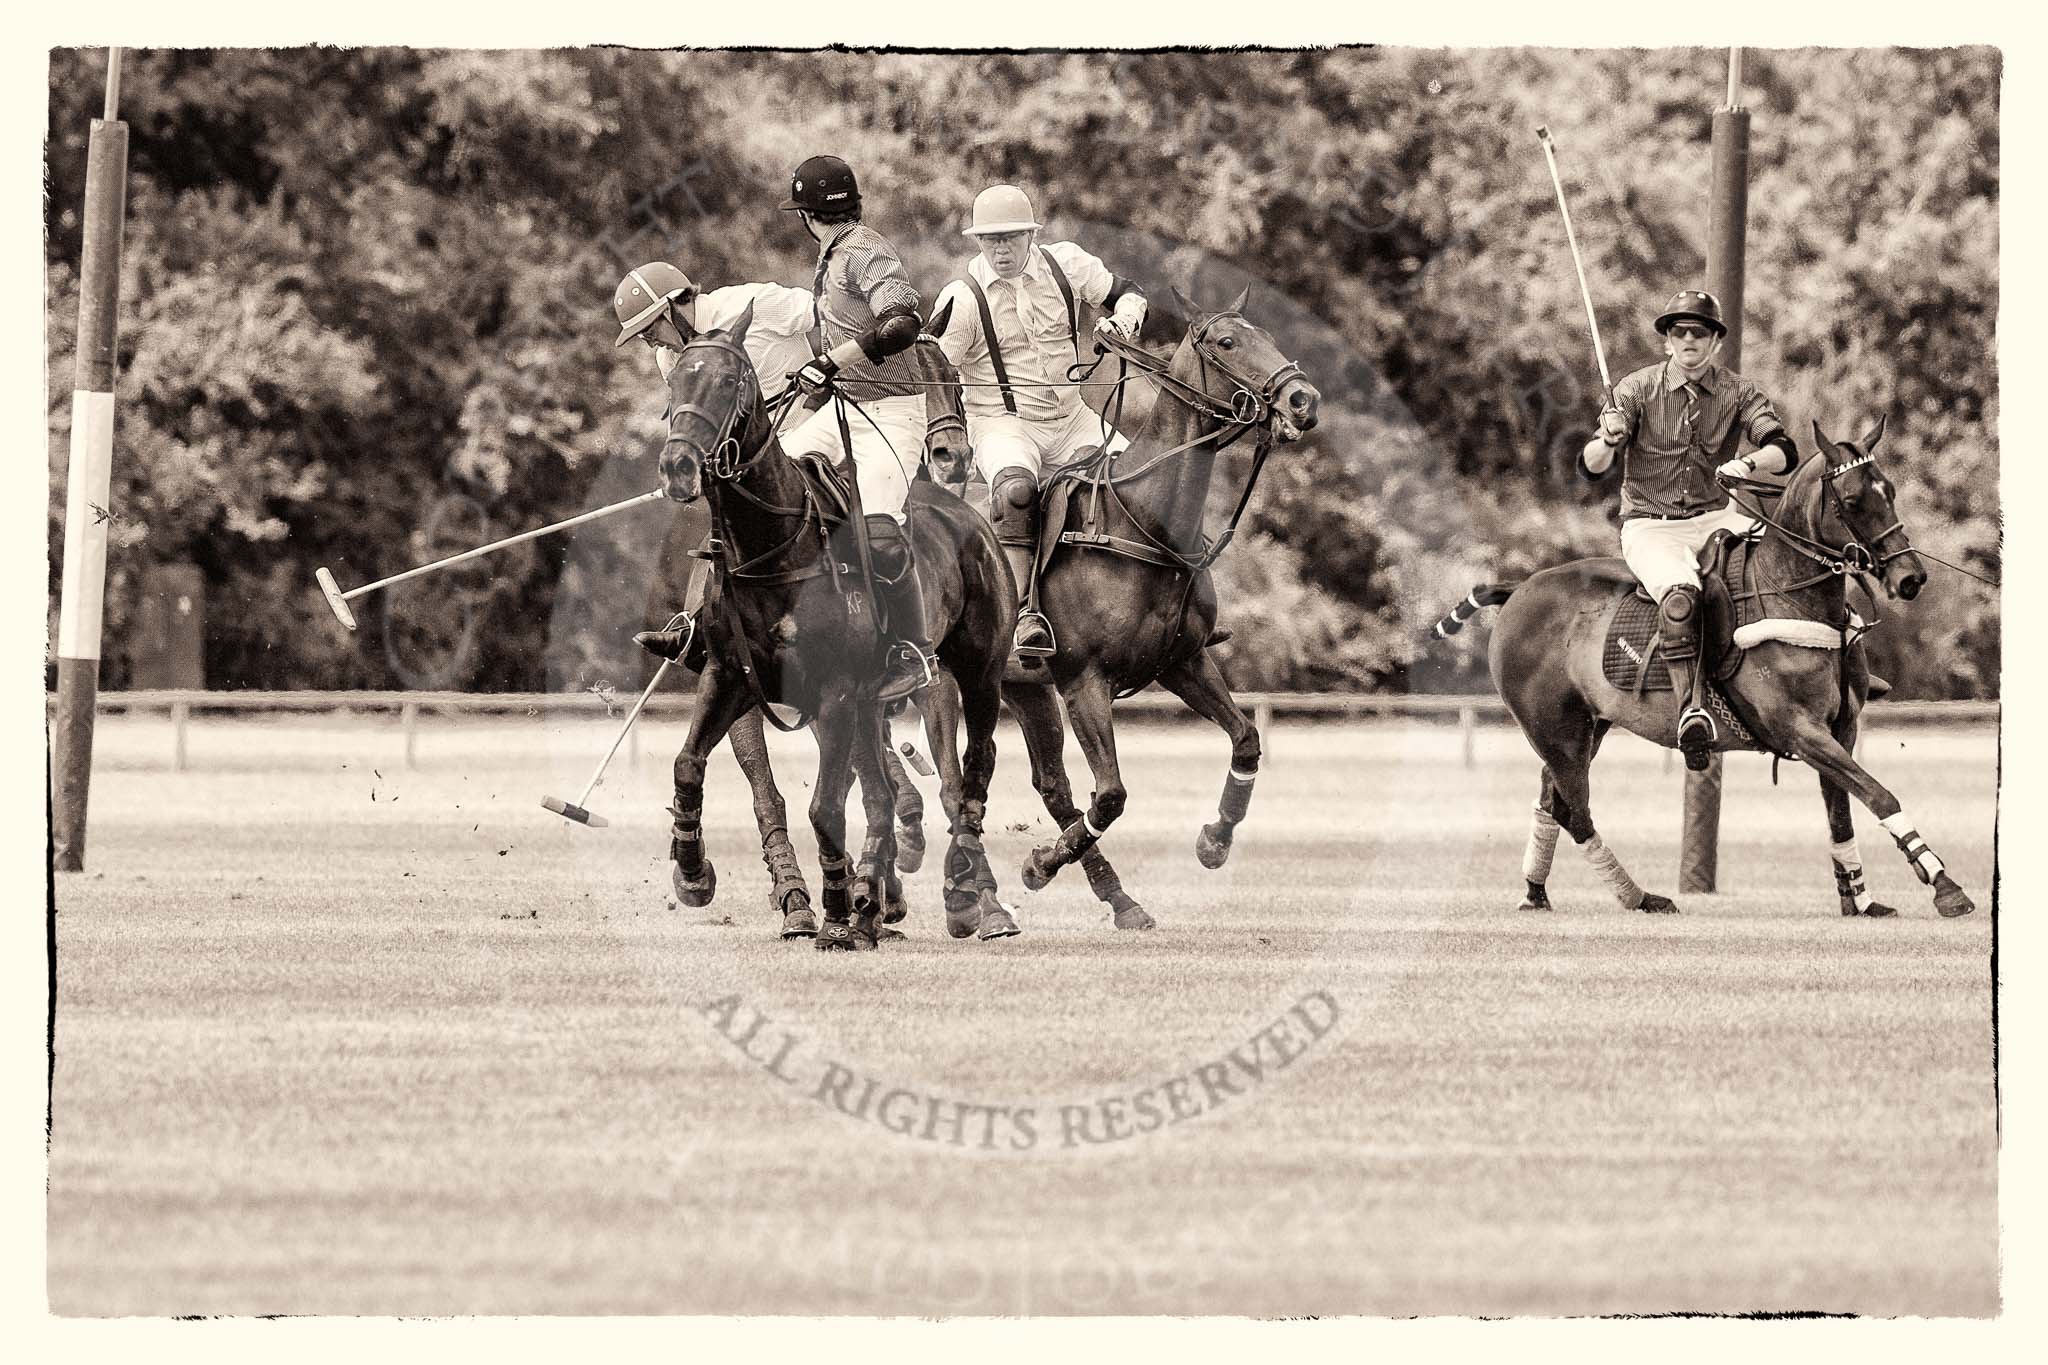 7th Heritage Polo Cup finals: La Mariposa Argentina, Sebastian Funes on the ball..
Hurtwood Park Polo Club,
Ewhurst Green,
Surrey,
United Kingdom,
on 05 August 2012 at 13:23, image #19